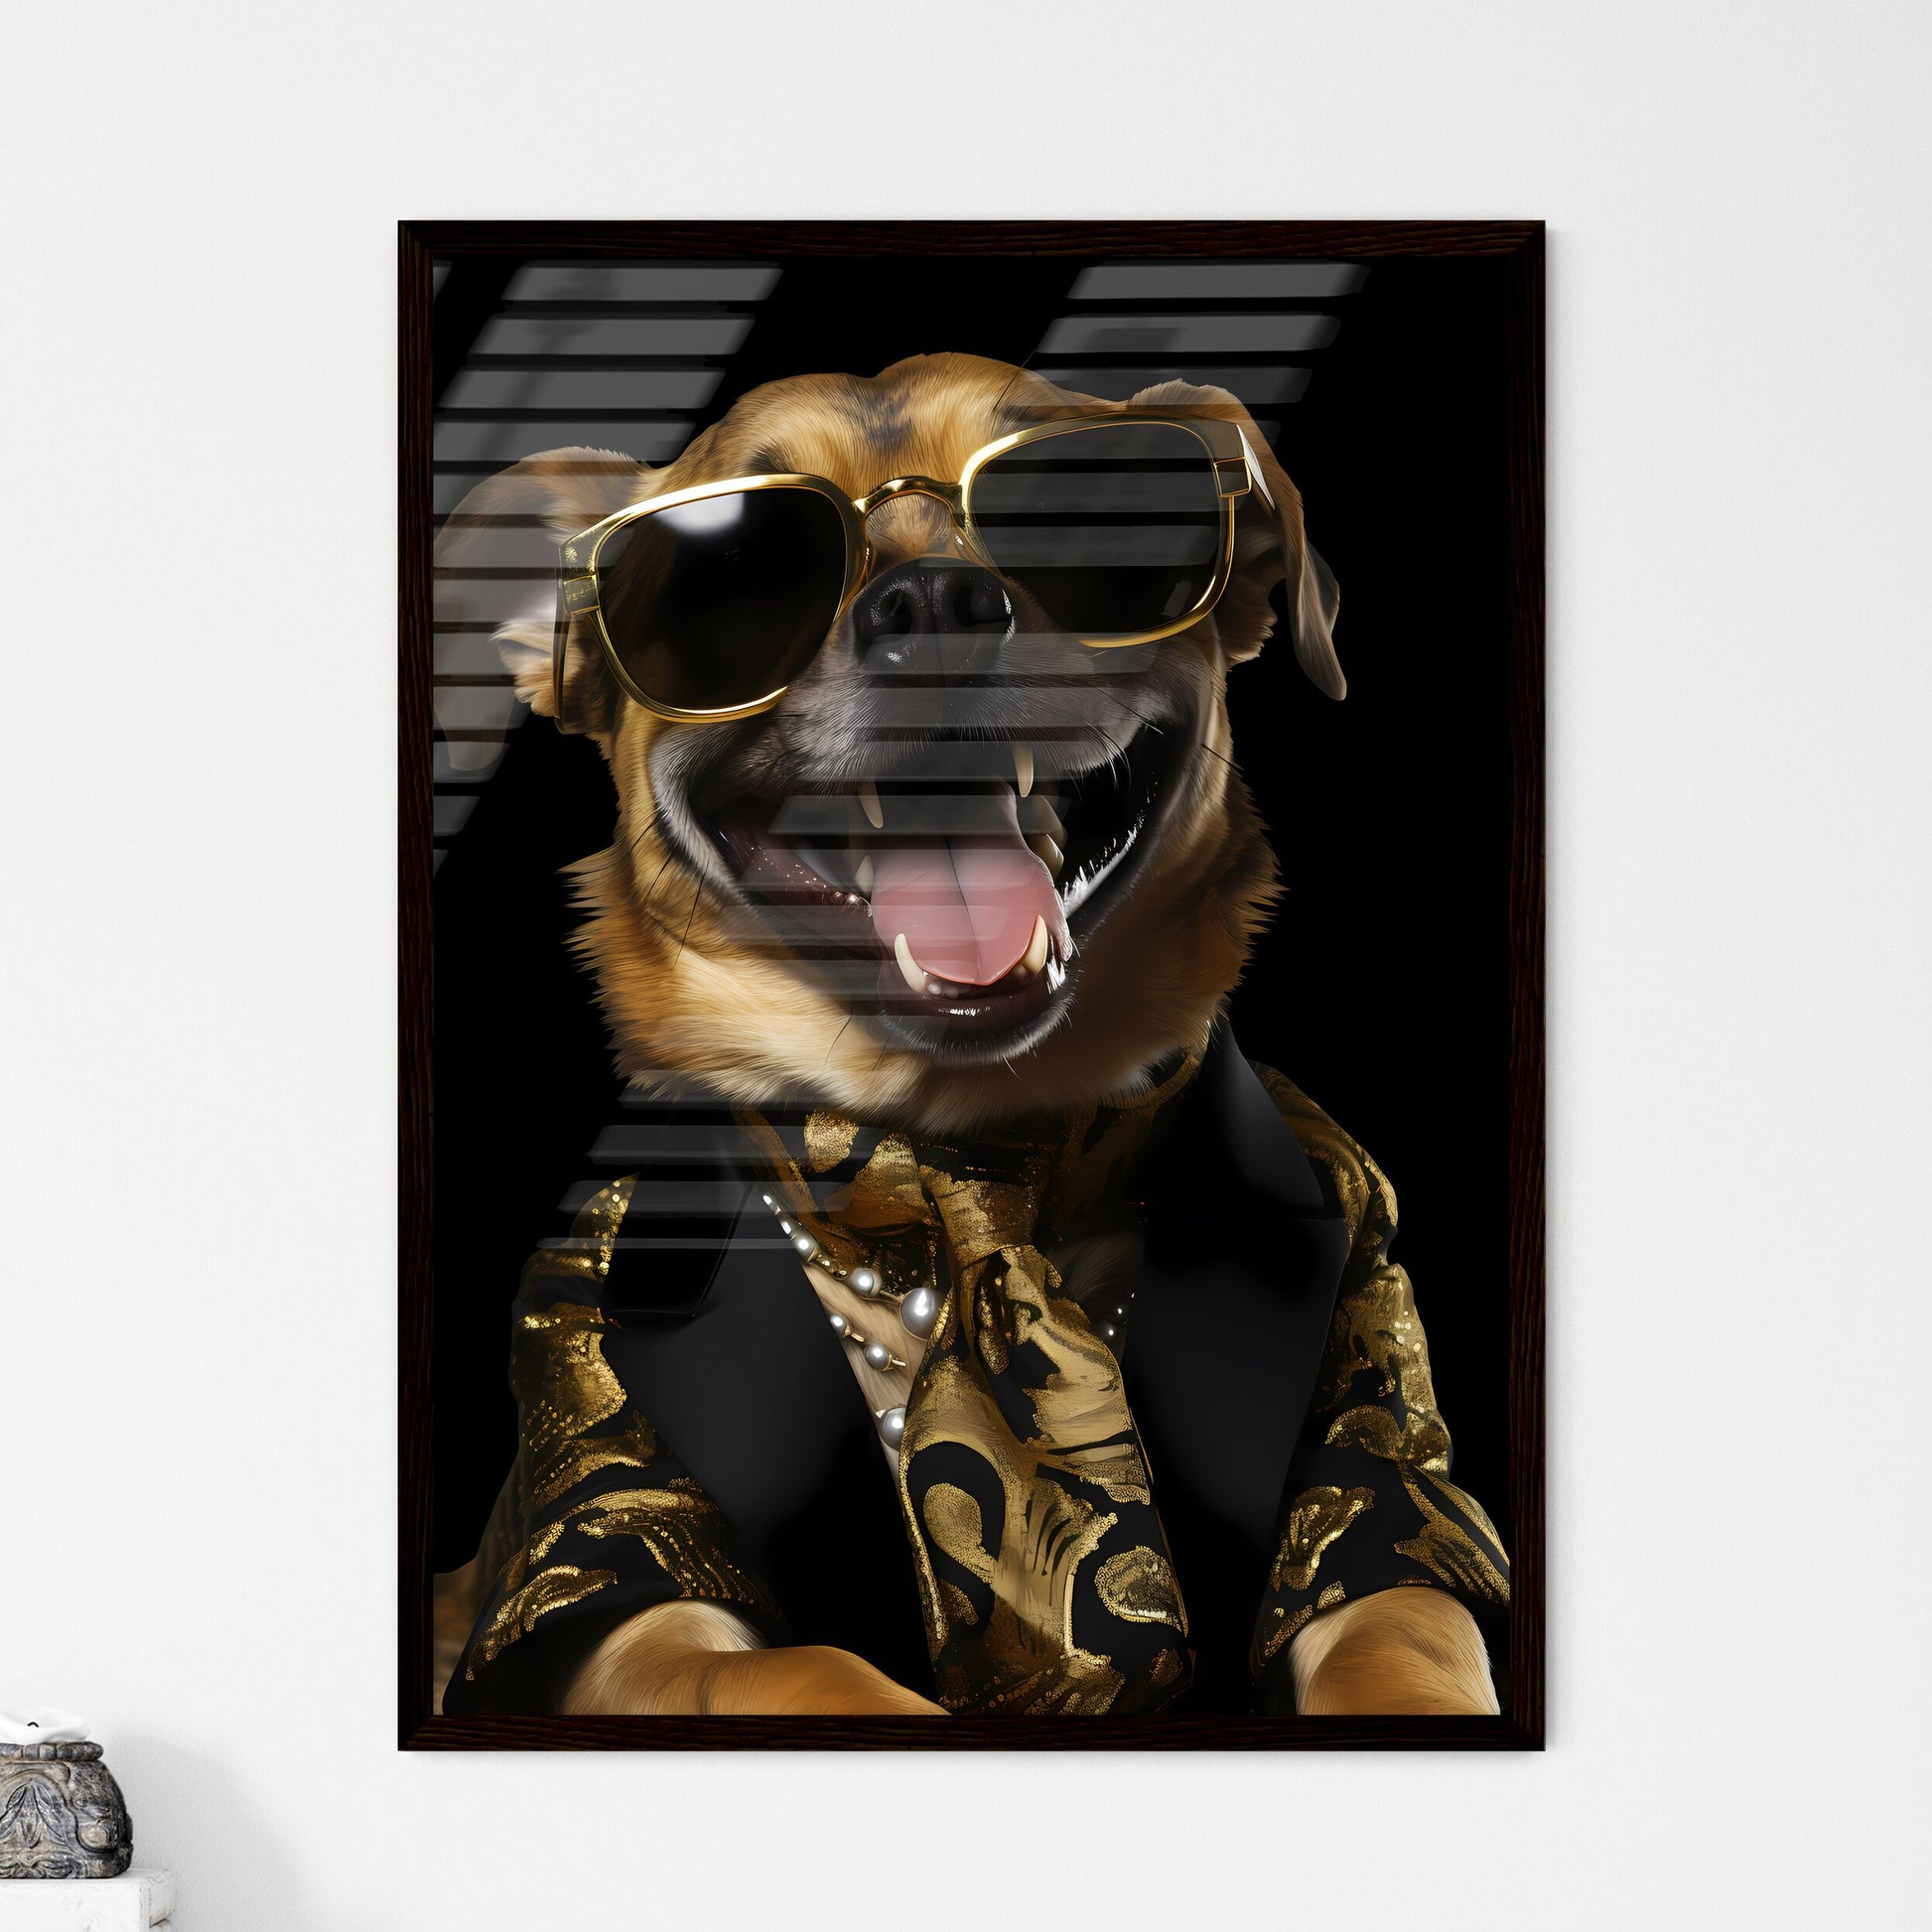 Swiss alpine dog vintage poster - Art print of a dog wearing a suit and sunglasses Default Title